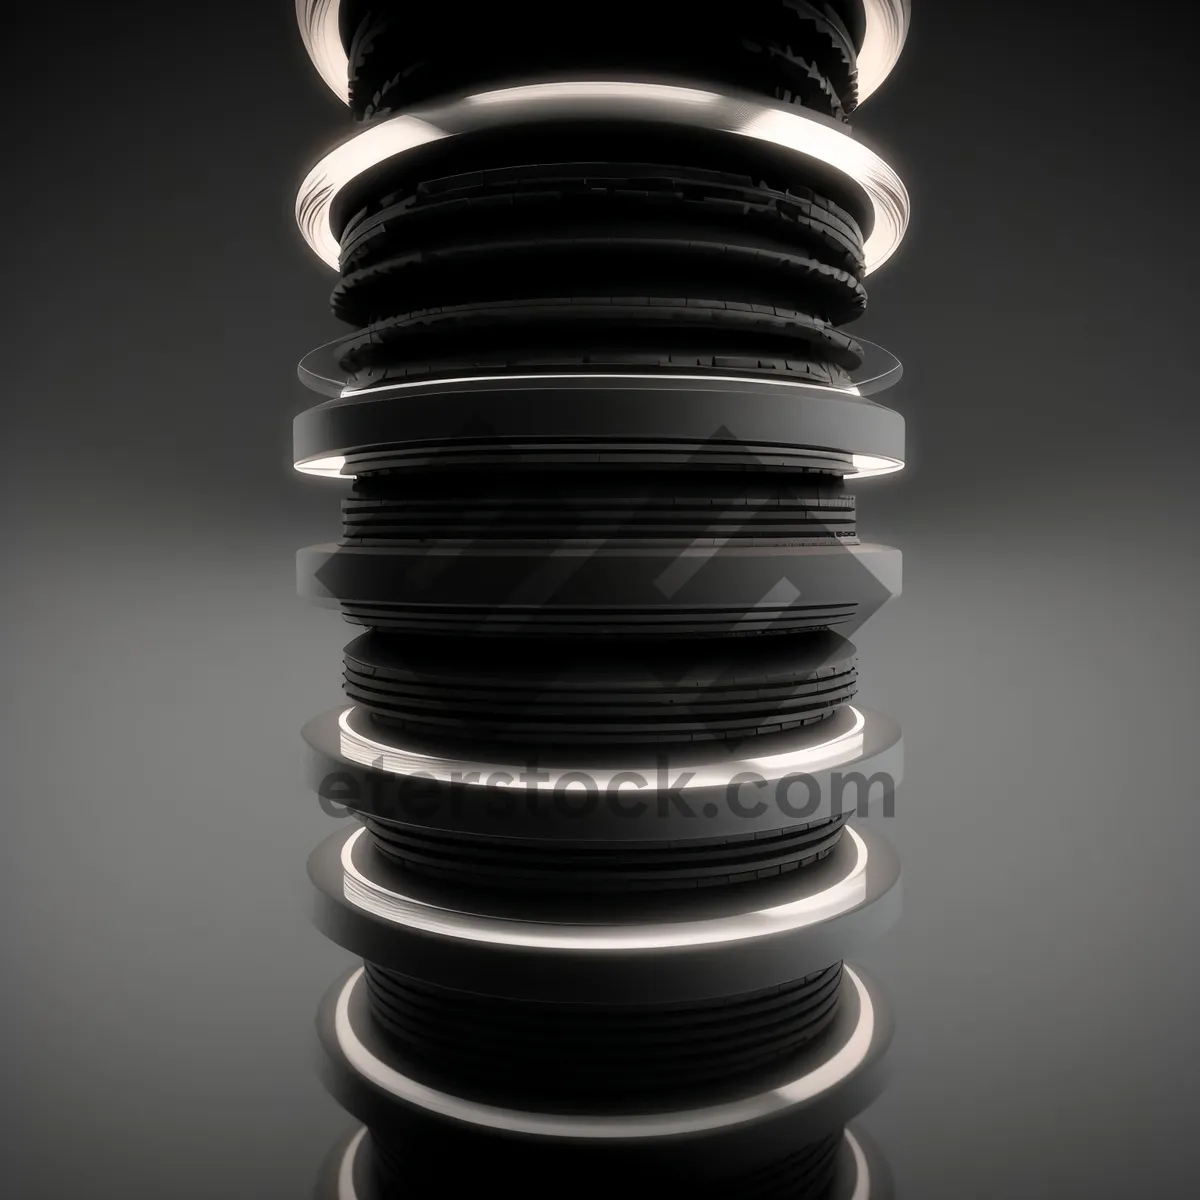 Picture of Elastic Finance: Coin Stack on Coil Spring